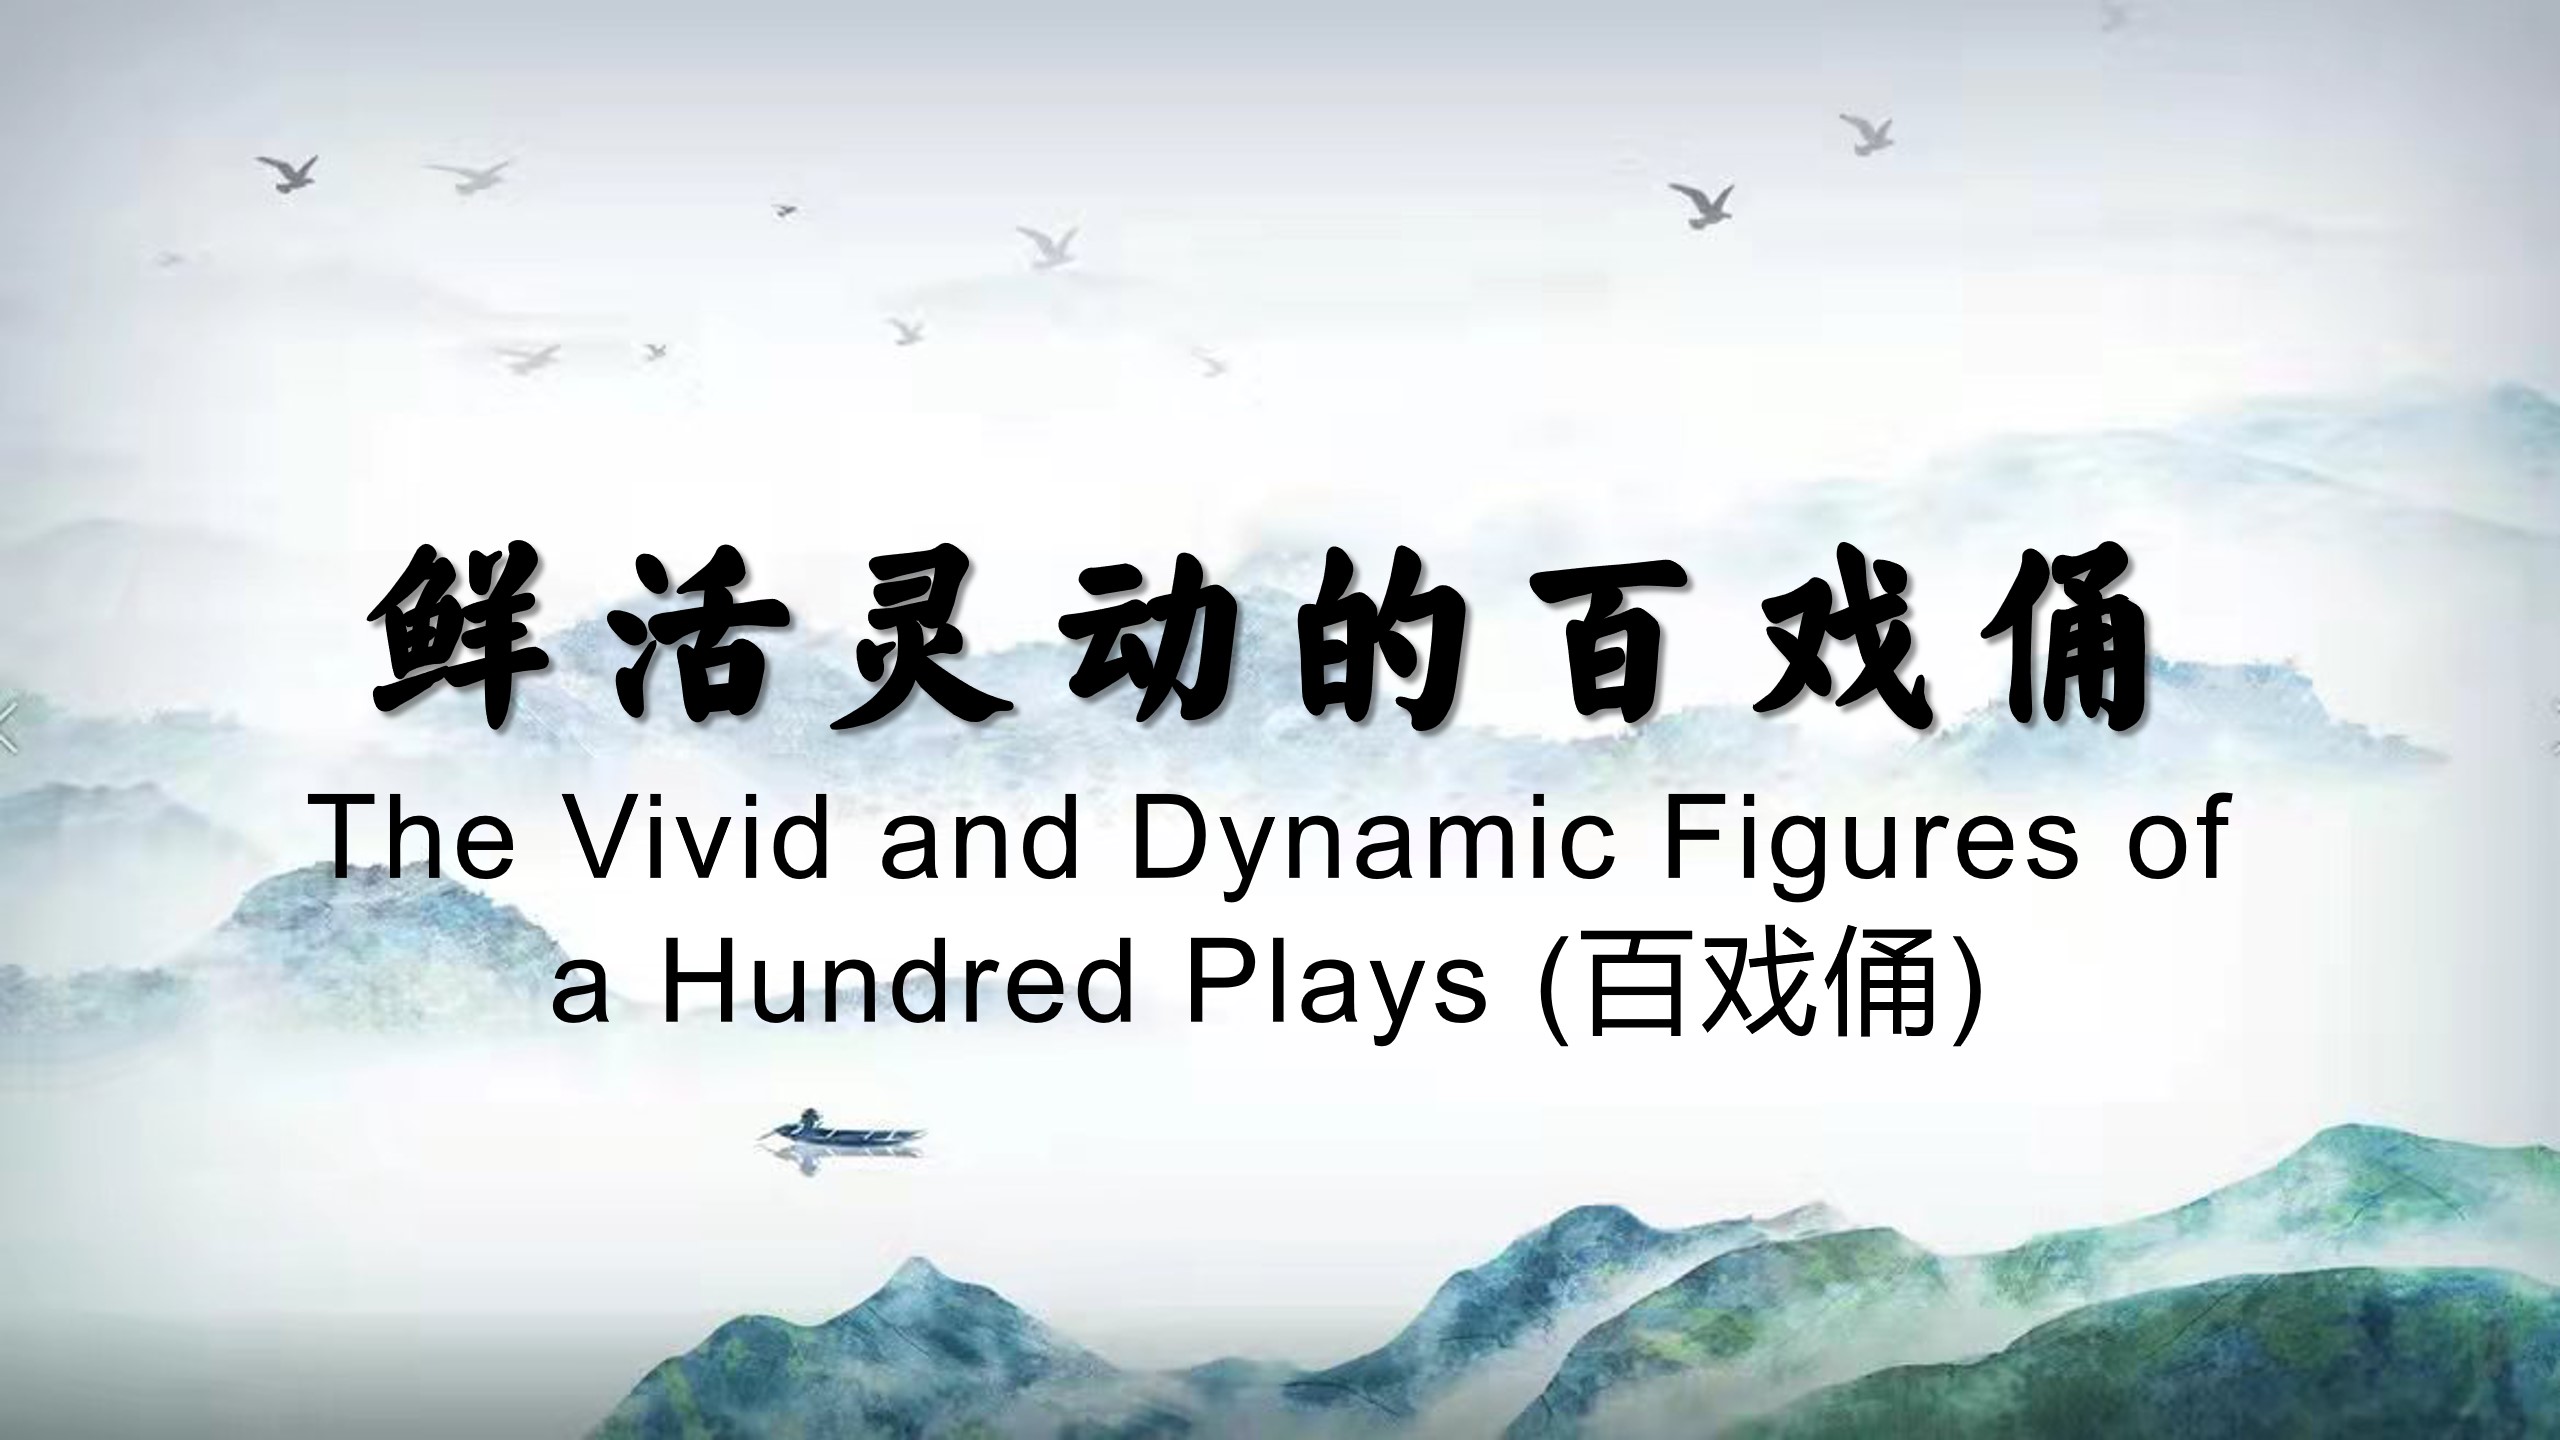 The Vivid and Dynamic Figures of a Hundred Plays (百戏俑)